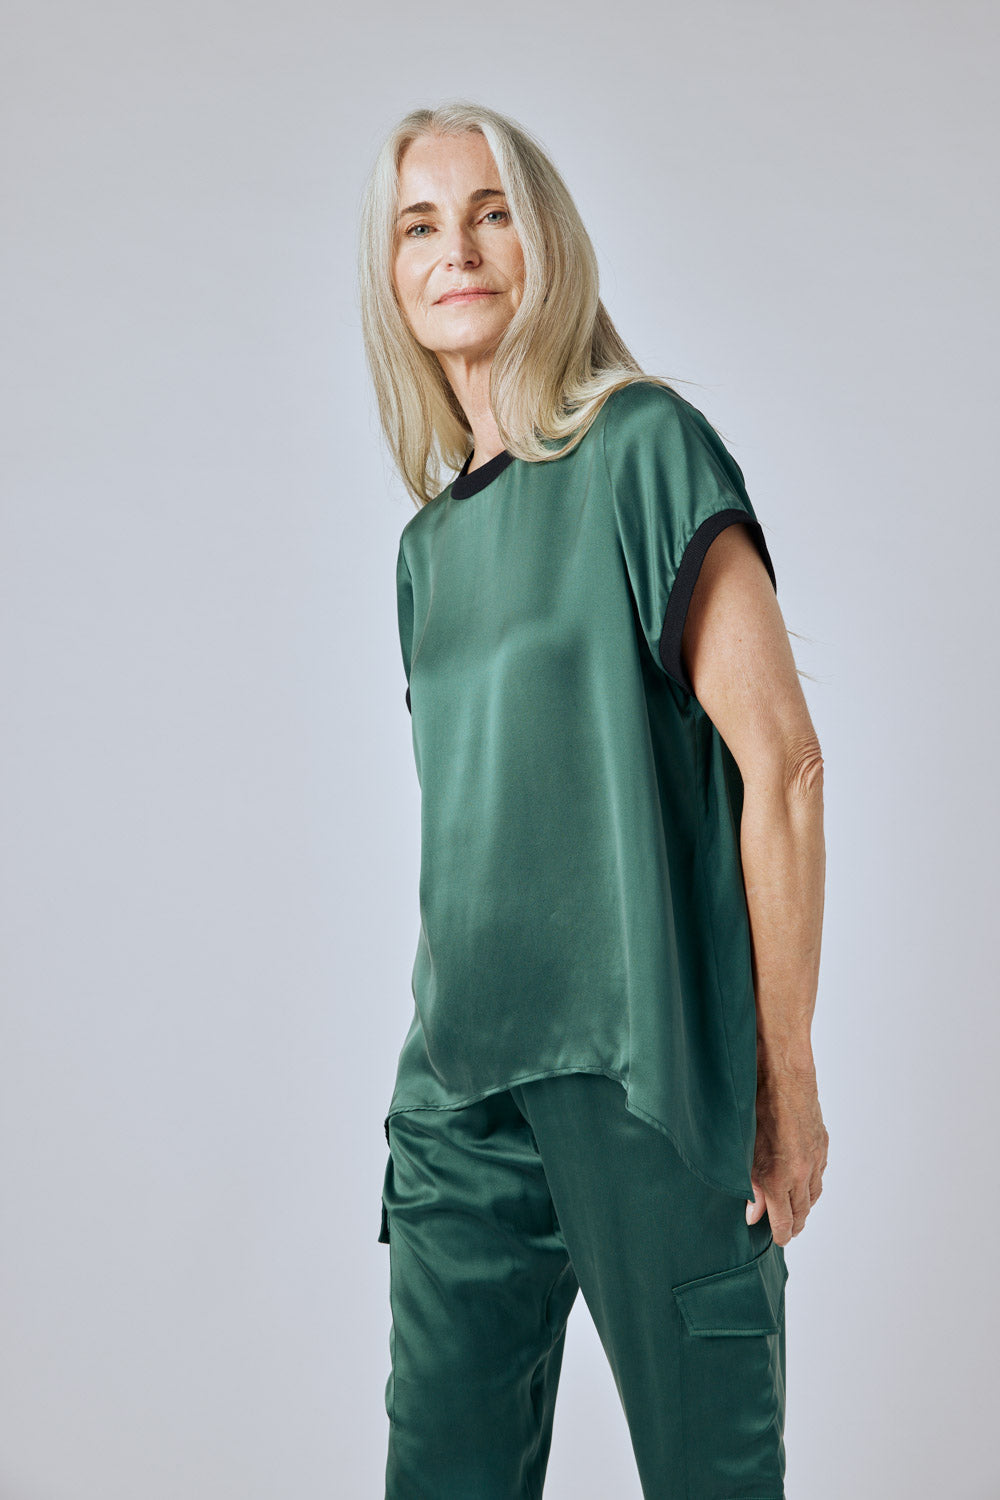 The Relaxed Washable Silk Top